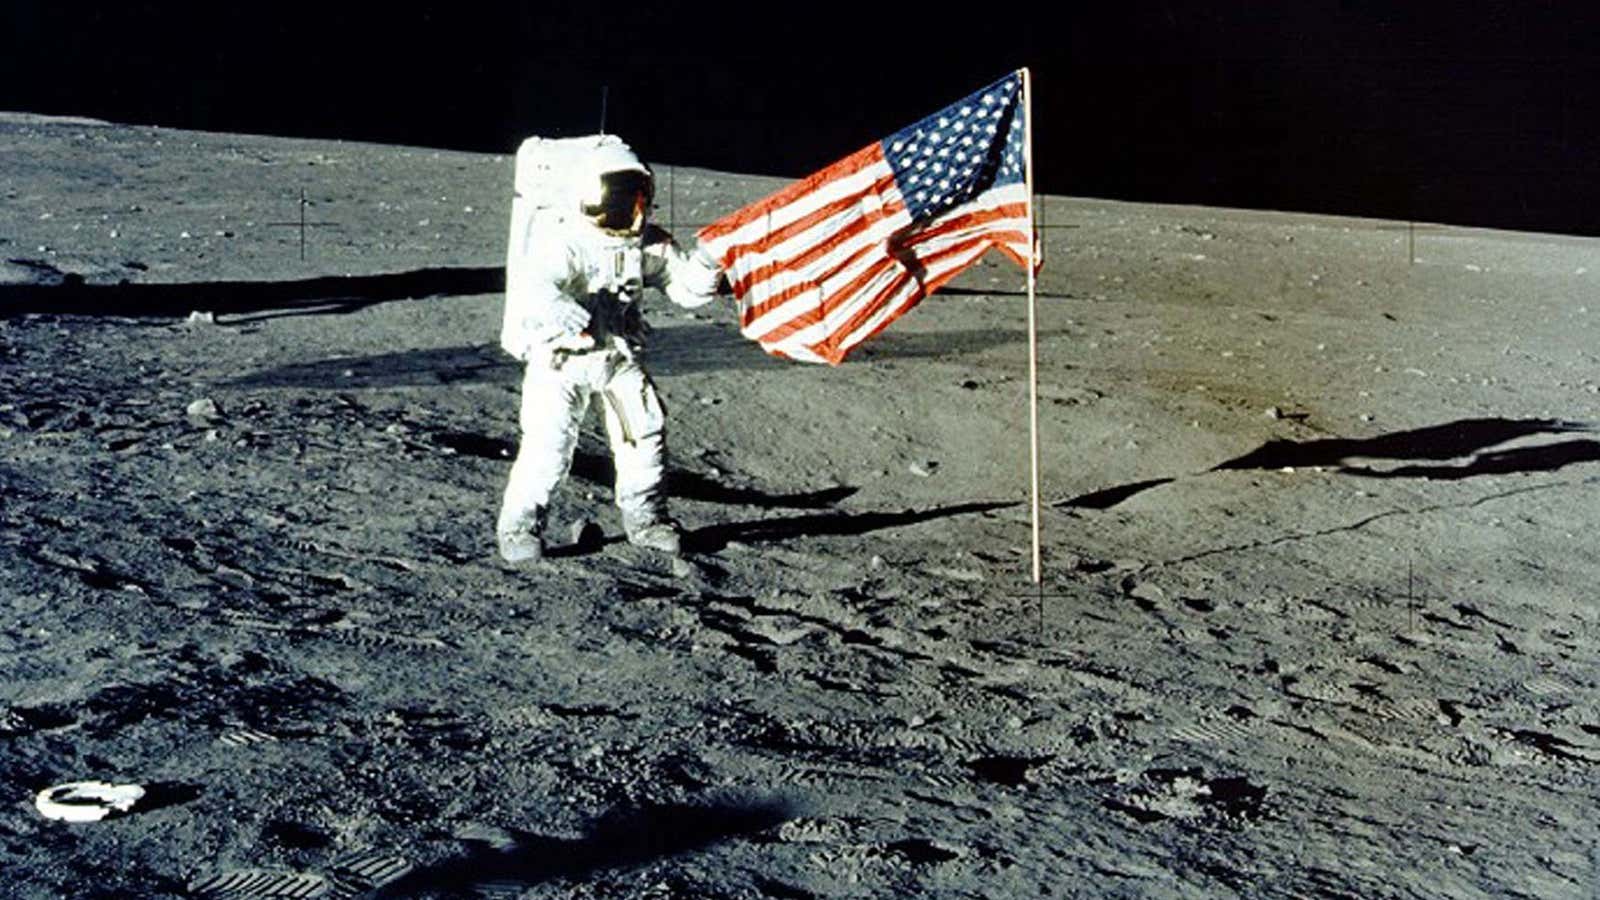 Moon landing conspiracy theories have persisted in the popular imagination.